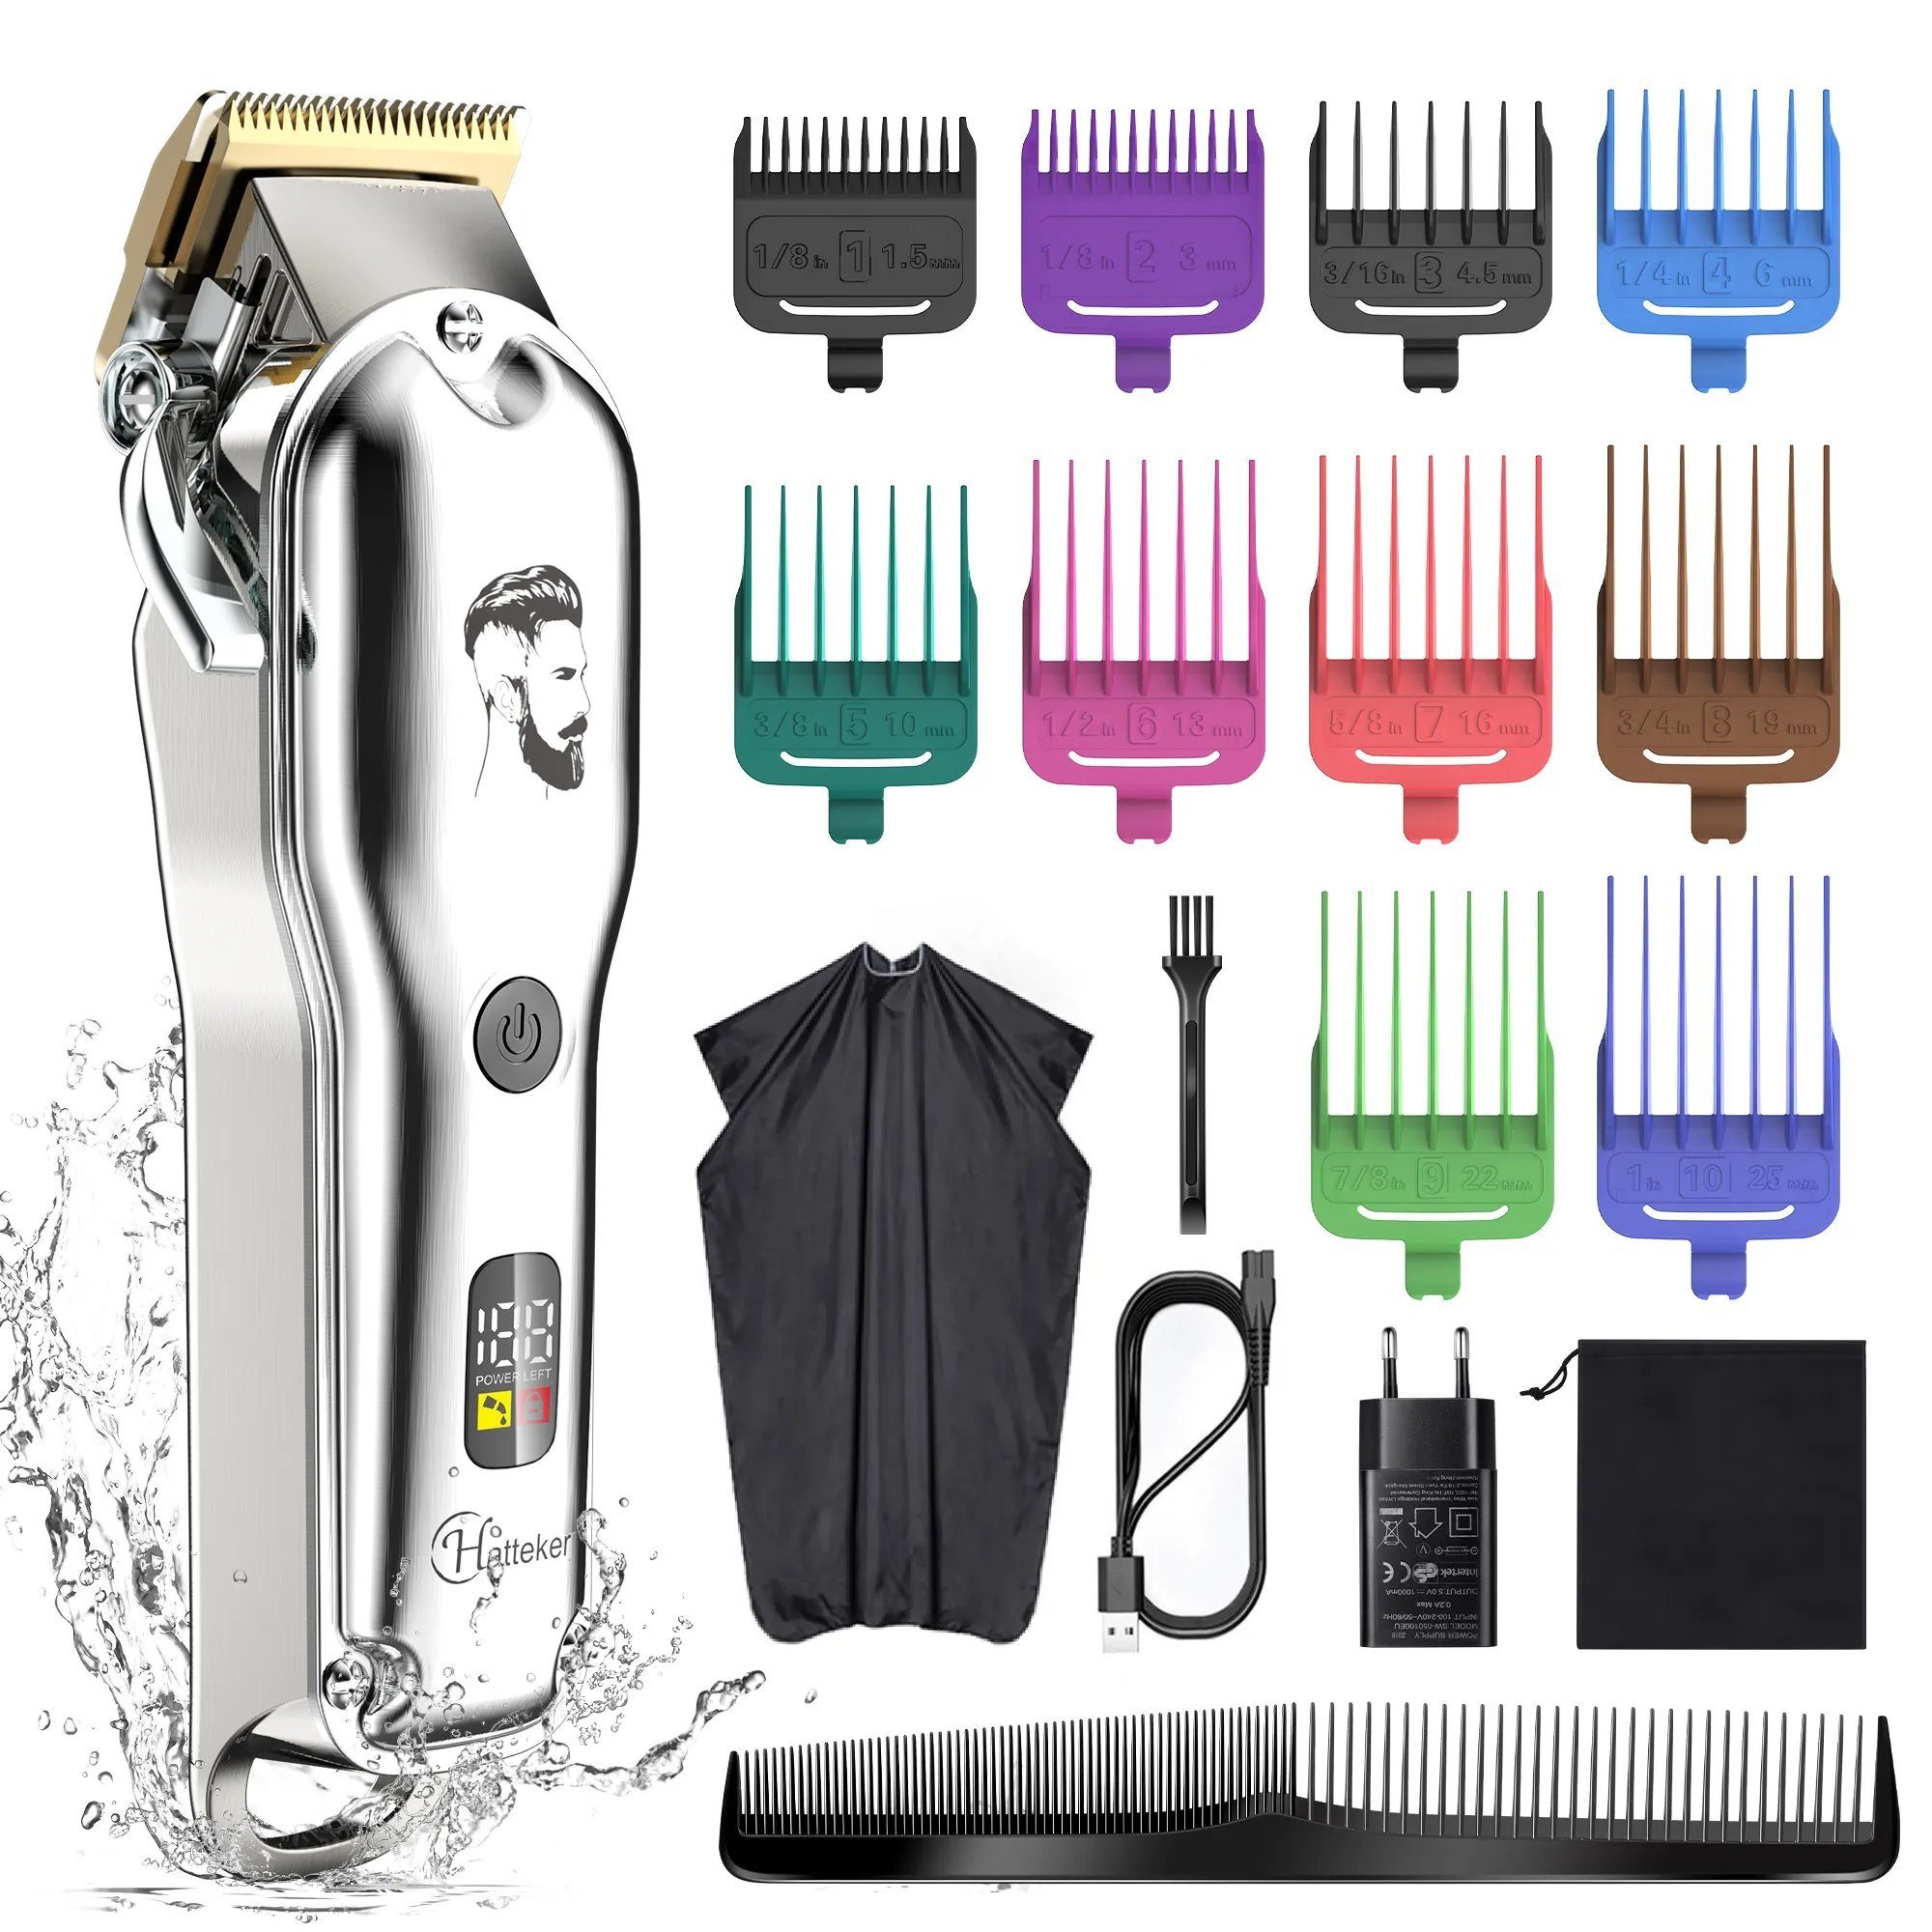 HATTEKER Beauty-Trimmer Professional Barbers Grooming Kit Rechargeable, 2000 mAh, Colorful Combs Hair Clippers, Vollständig waschbar